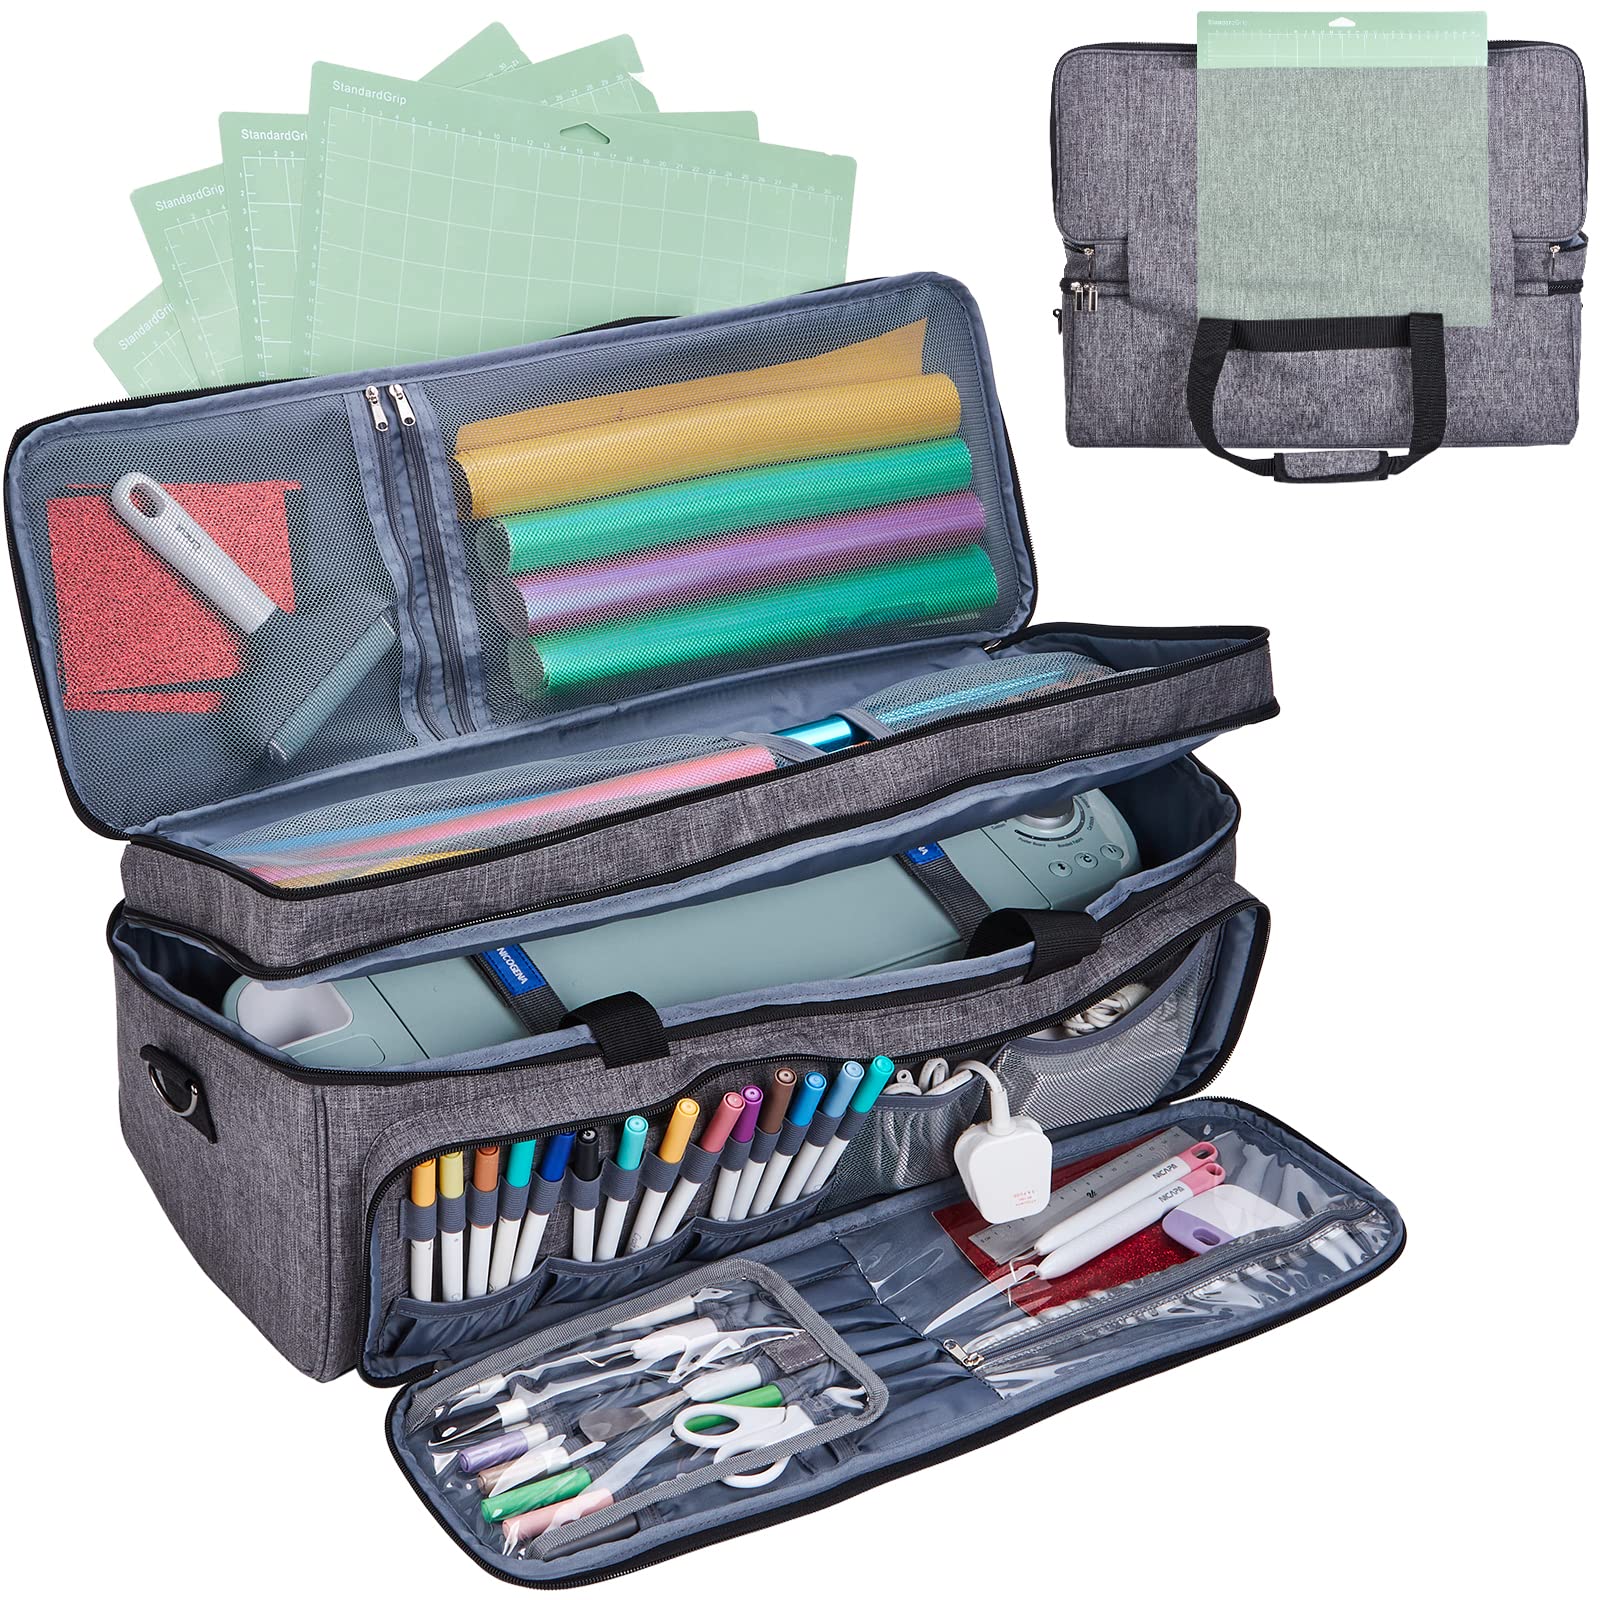 NICOGENA Double Layer Carrying Case with Mat Pocket for Cricut Explore Air  2 Cricut Maker Multi Large Front Pockets for Tools Accessories and Supplies  Grey III-Grey (Double Layer with Mat)